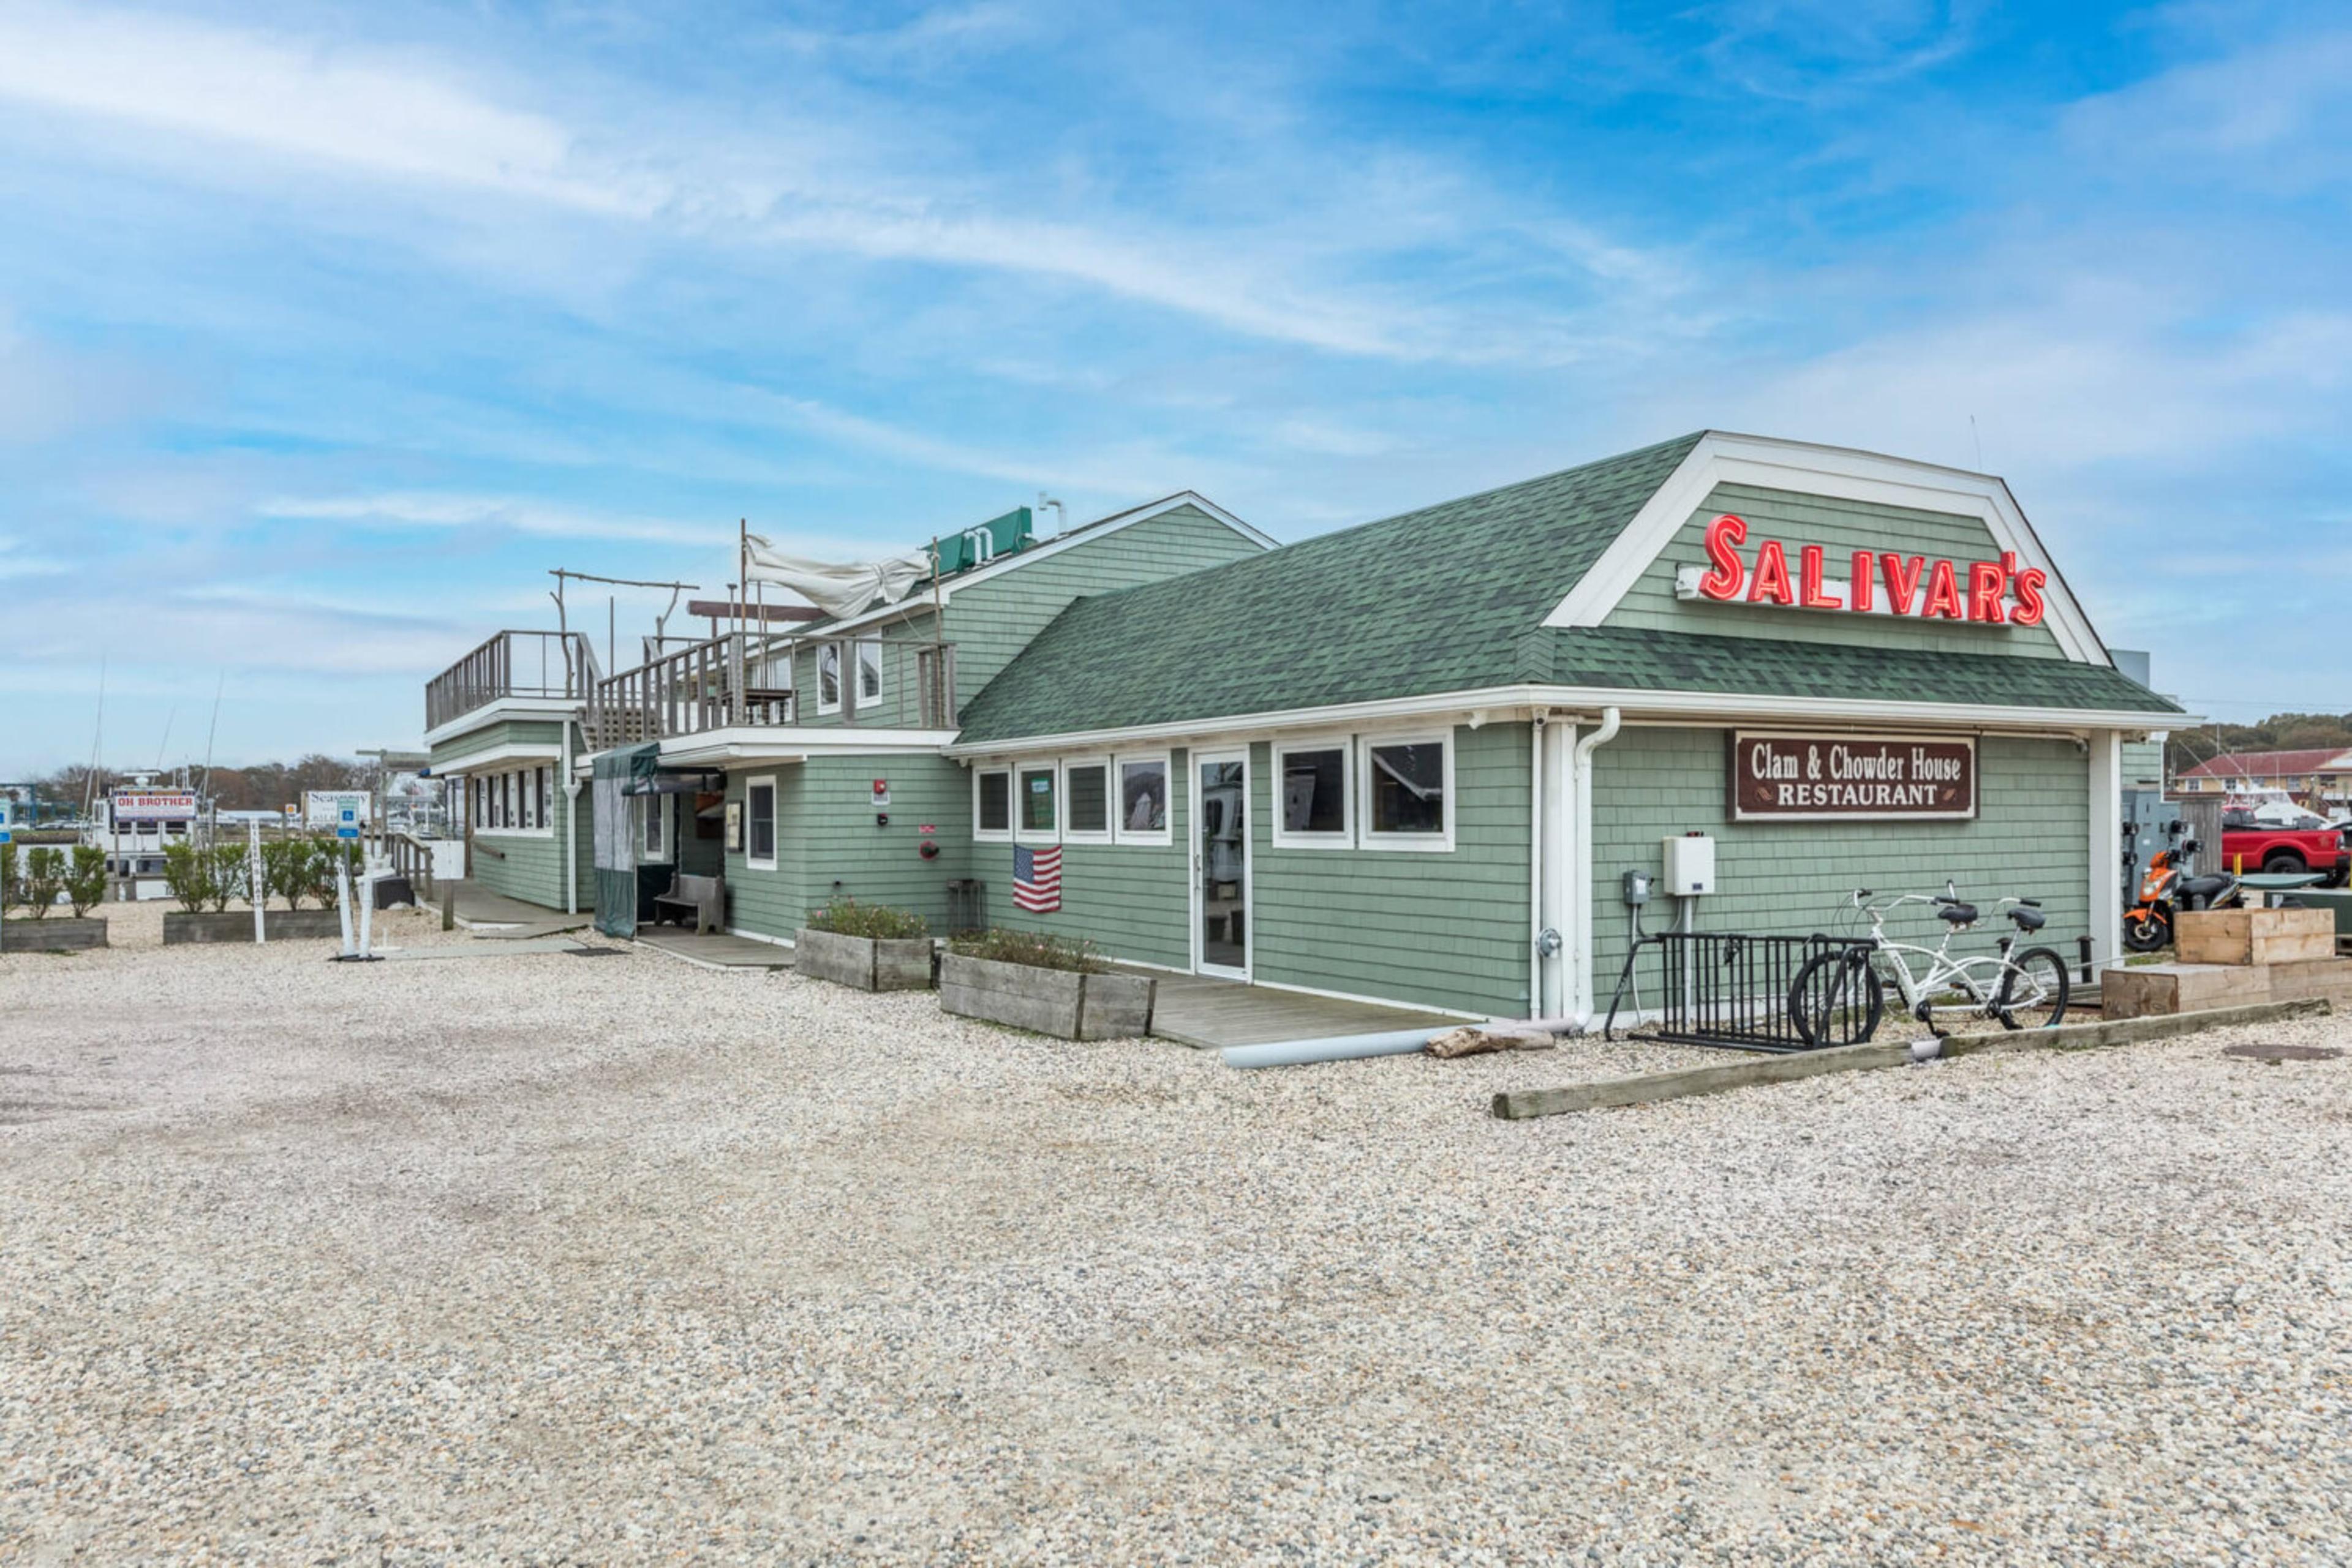 Clam and Chowder House at Salivar's Dock